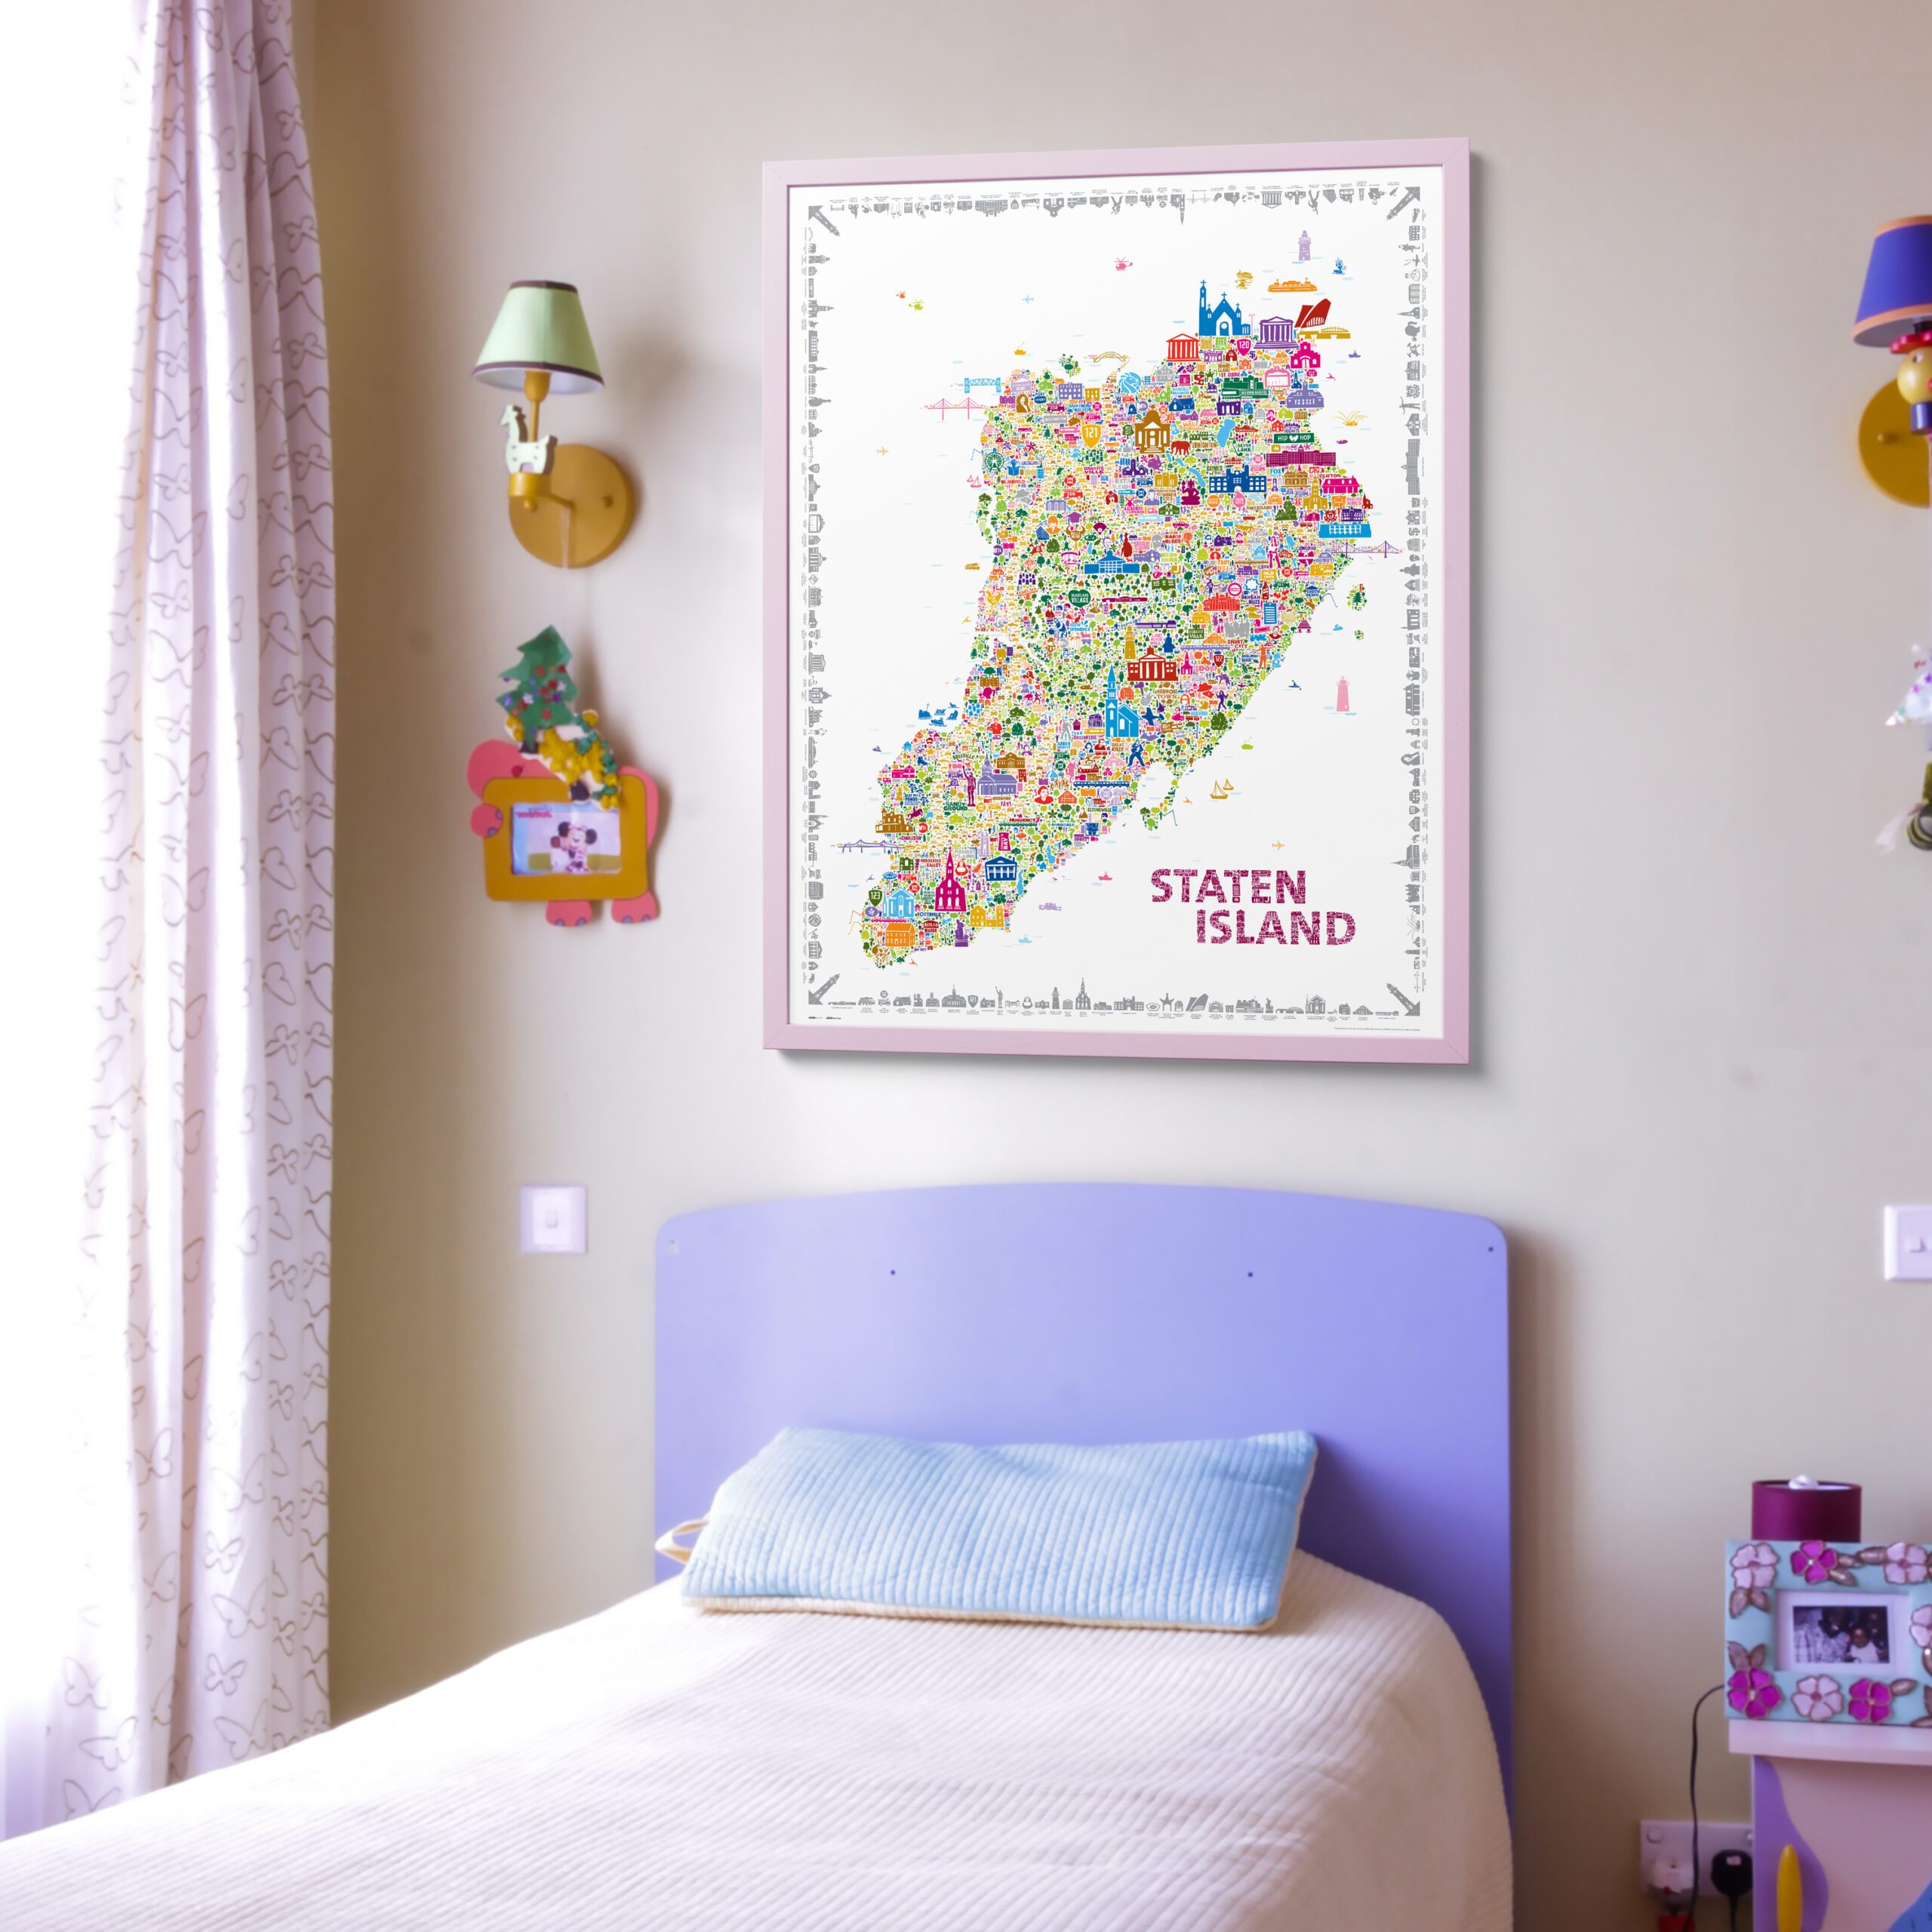 Iconic Staten Island Borough Map Modern Poster Print Living Room Bedroom Office Dorm Farmhouse Dining Kids Room Kitchen NYC City Artwork Vintage Prints Unique Aesthetic Style Home Decor Posters Trendy Cool Wall Art Perfect Housewarming Souvenir Gift